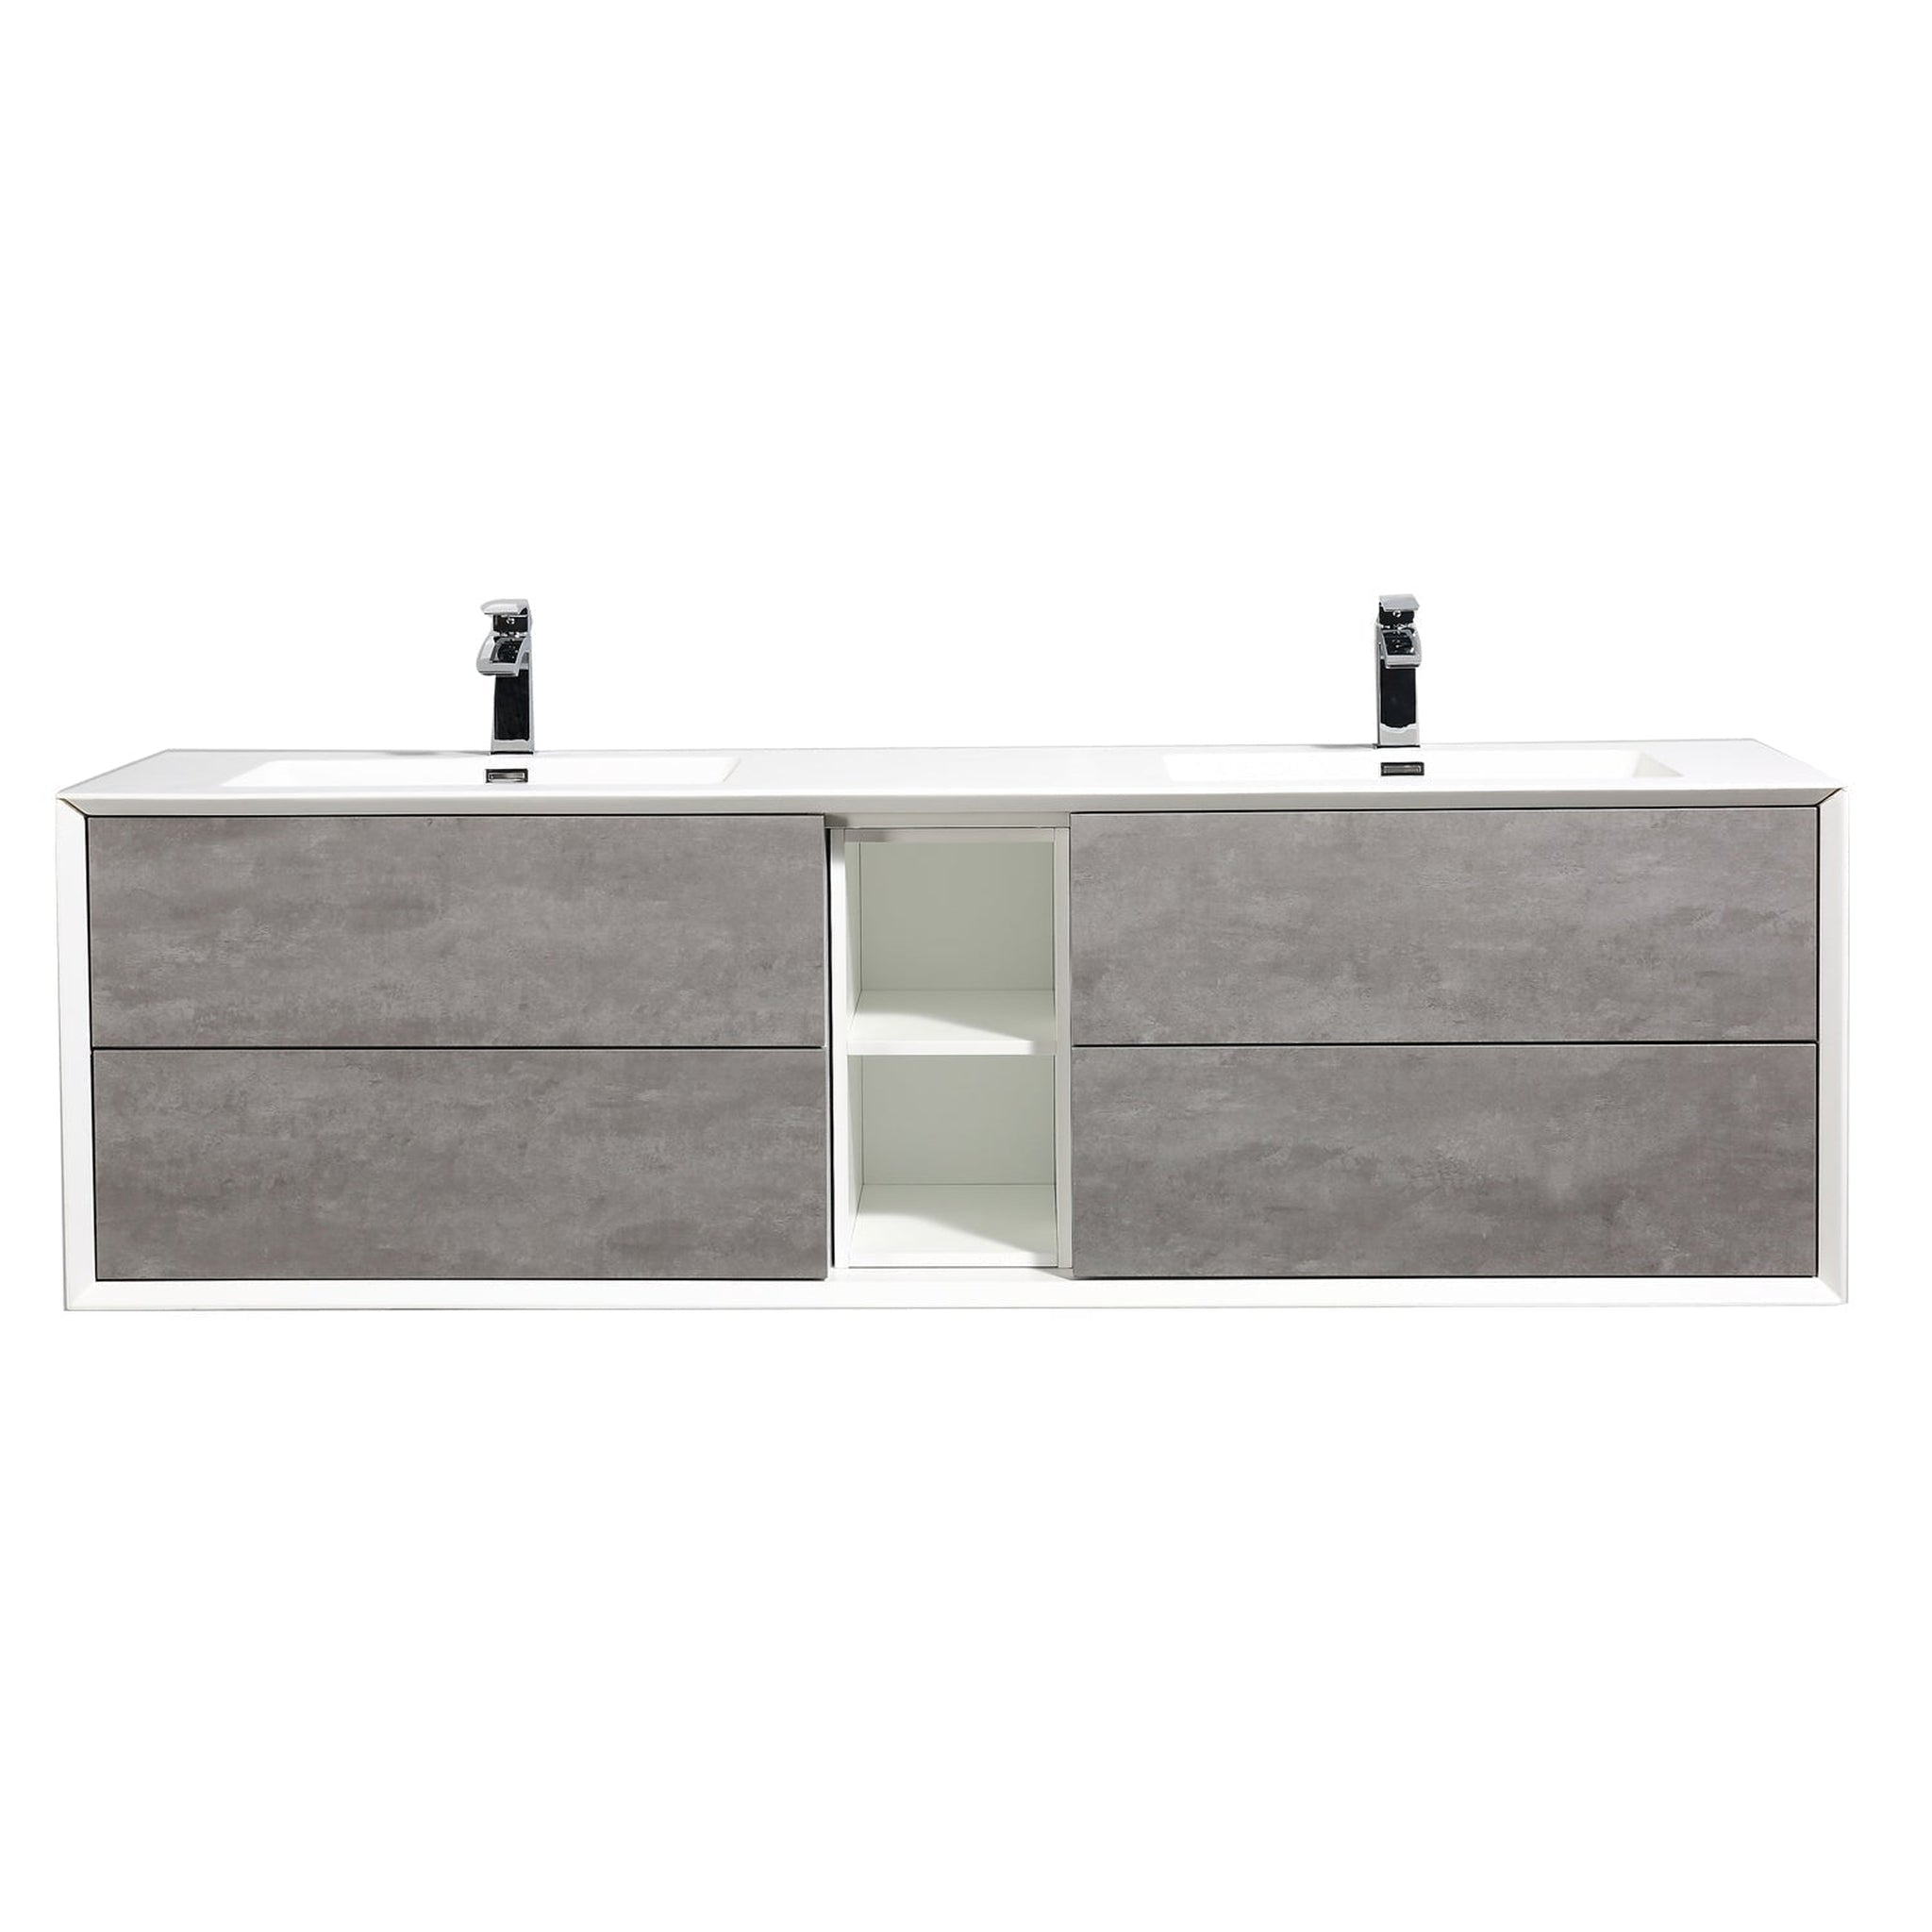 http://usbathstore.com/cdn/shop/products/Eviva-Vienna-75-x-22-Cement-Gray-Wall-Mounted-Bathroom-Vanity-With-White-Double-Integrated-Sink.jpg?v=1679029171